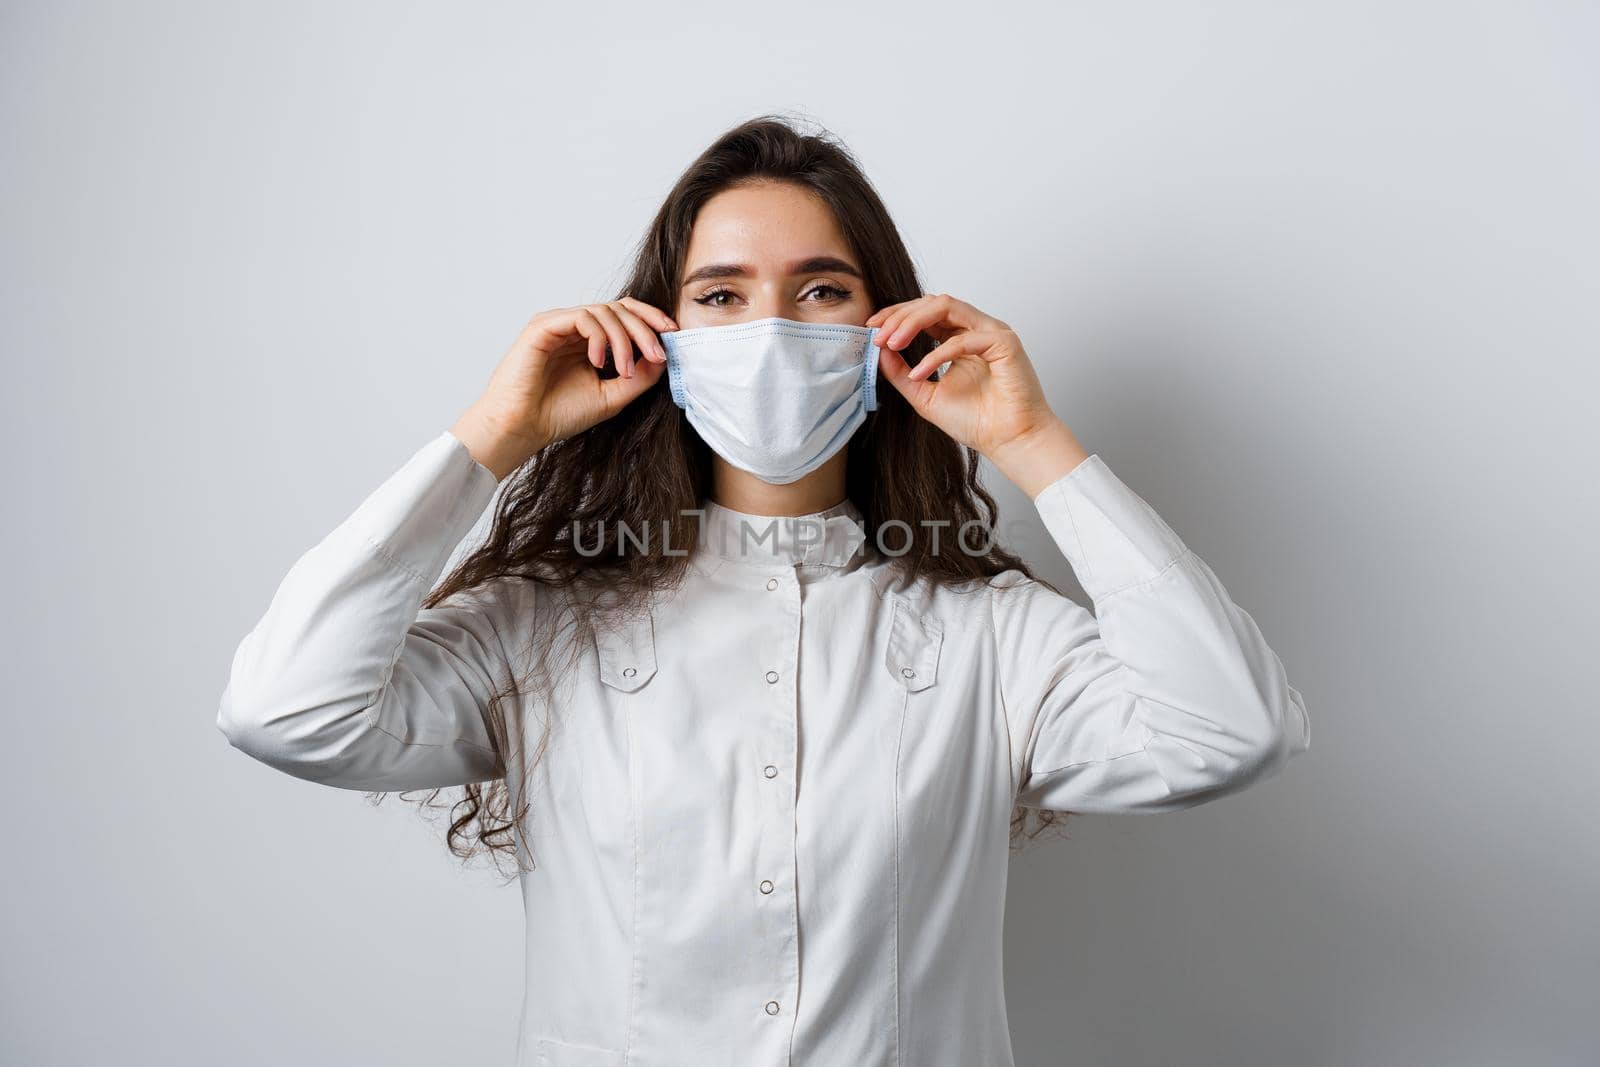 Doctor wearing medical mask on white background. Young attractive woman in medical robe. Quarantine coronavirus covid-19 trends.